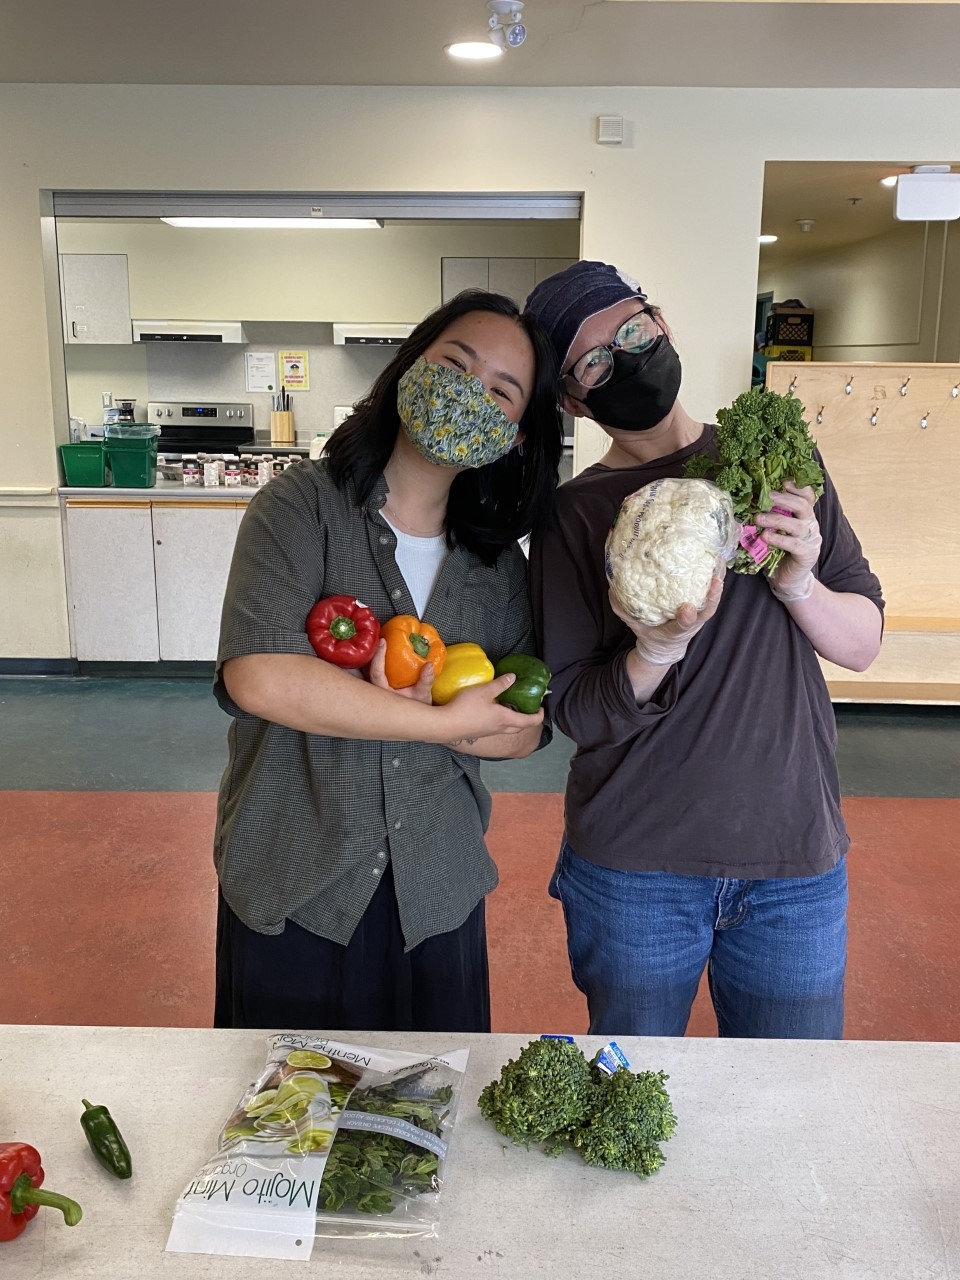 Two people holding produce (bell peppers, cauliflower and broccoli) and wearing masks smile and pose for a photo.